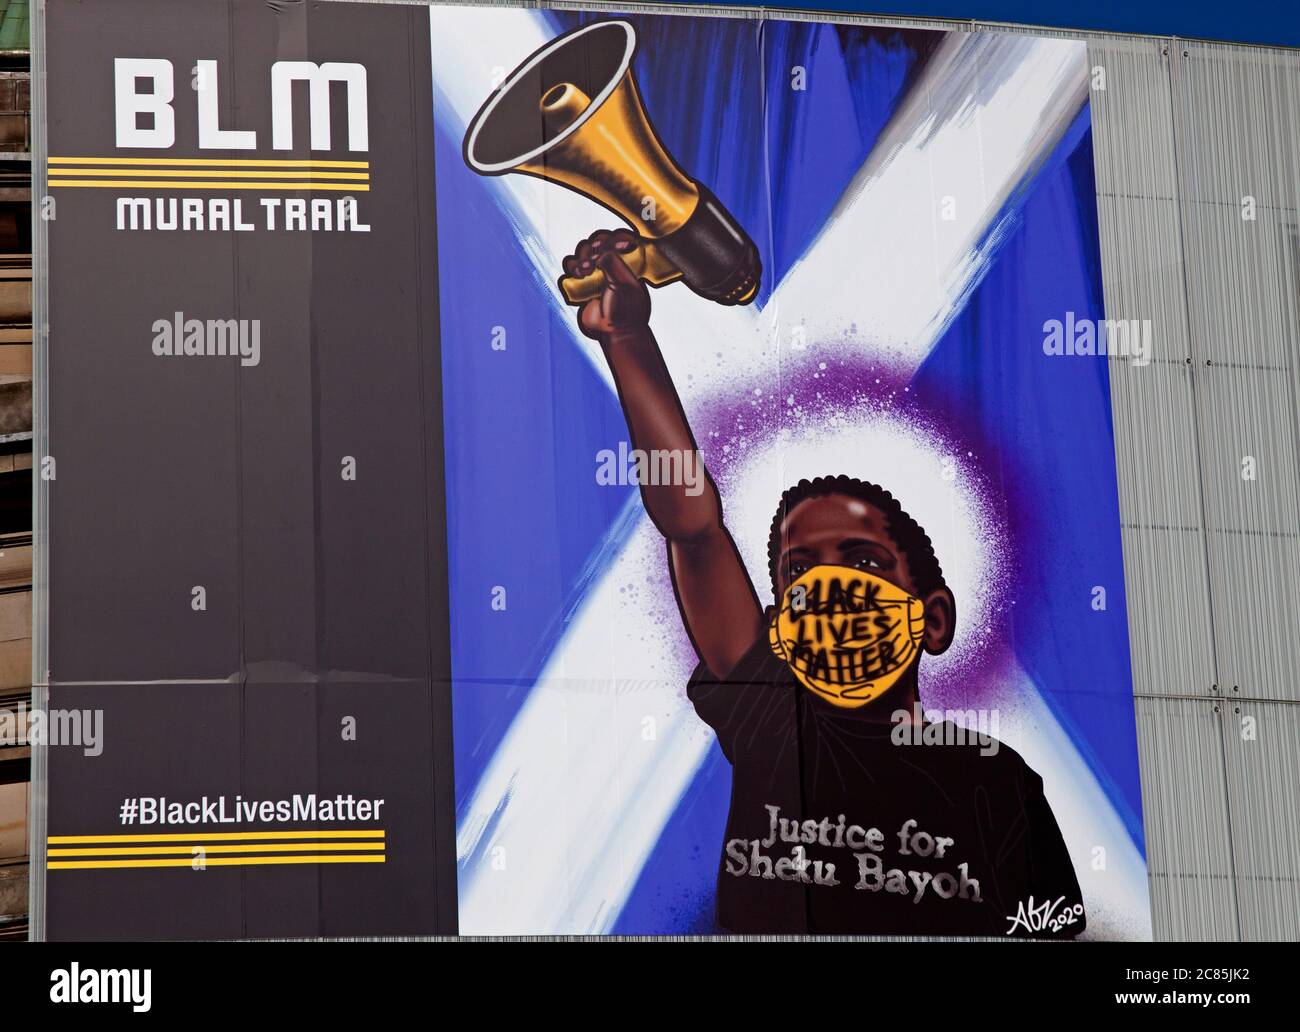 Usher Hall, Edinburgh, Scotland, UK. The Black Lives Matter trail has a new addition in the City Centre, the newest piece of artwork on the trail is a massive 5.5 meter x 6.5 metre print which has appeared on the front of Edinburgh's Usher Hall. A tribute to Fife's Sheku Bayoh who died in 2015 at the hands of Scots police and was created by Kirkcaldy artist Abigail Mill who wanted to express her mixed Scottish and Jamaican heritage. There are also other examples of the artist's work behind glass in the display boards in front of the venue. Credit: Arch White/Alamy Live News. Stock Photo